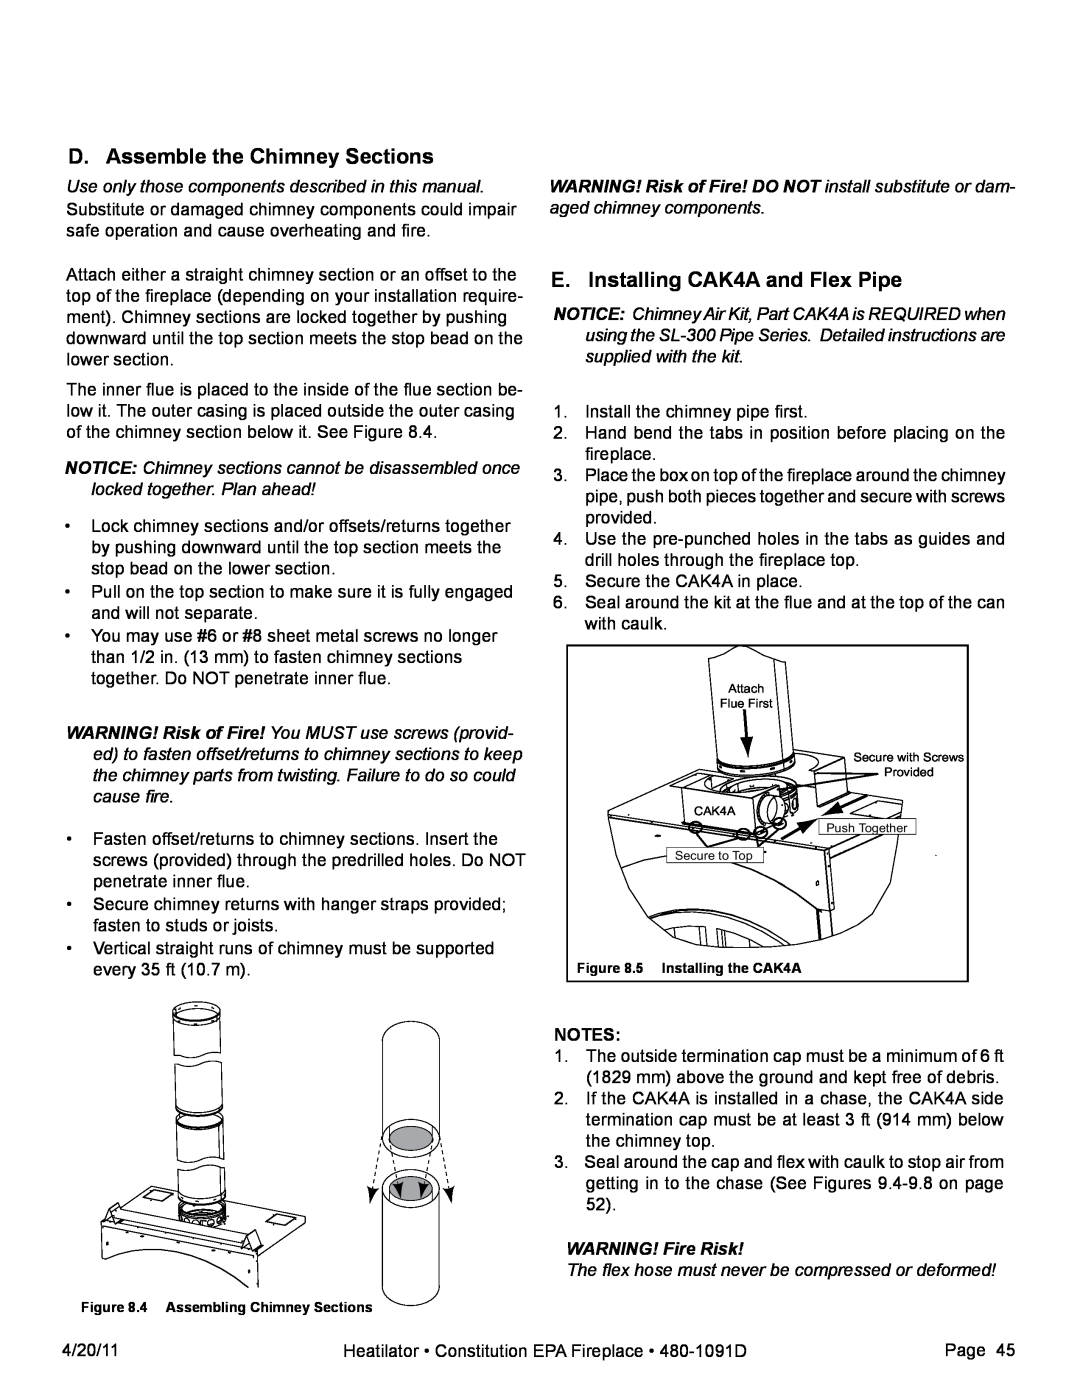 Heatiator C40 owner manual D. Assemble the Chimney Sections, E. Installing CAK4A and Flex Pipe, Notes, WARNING! Fire Risk 